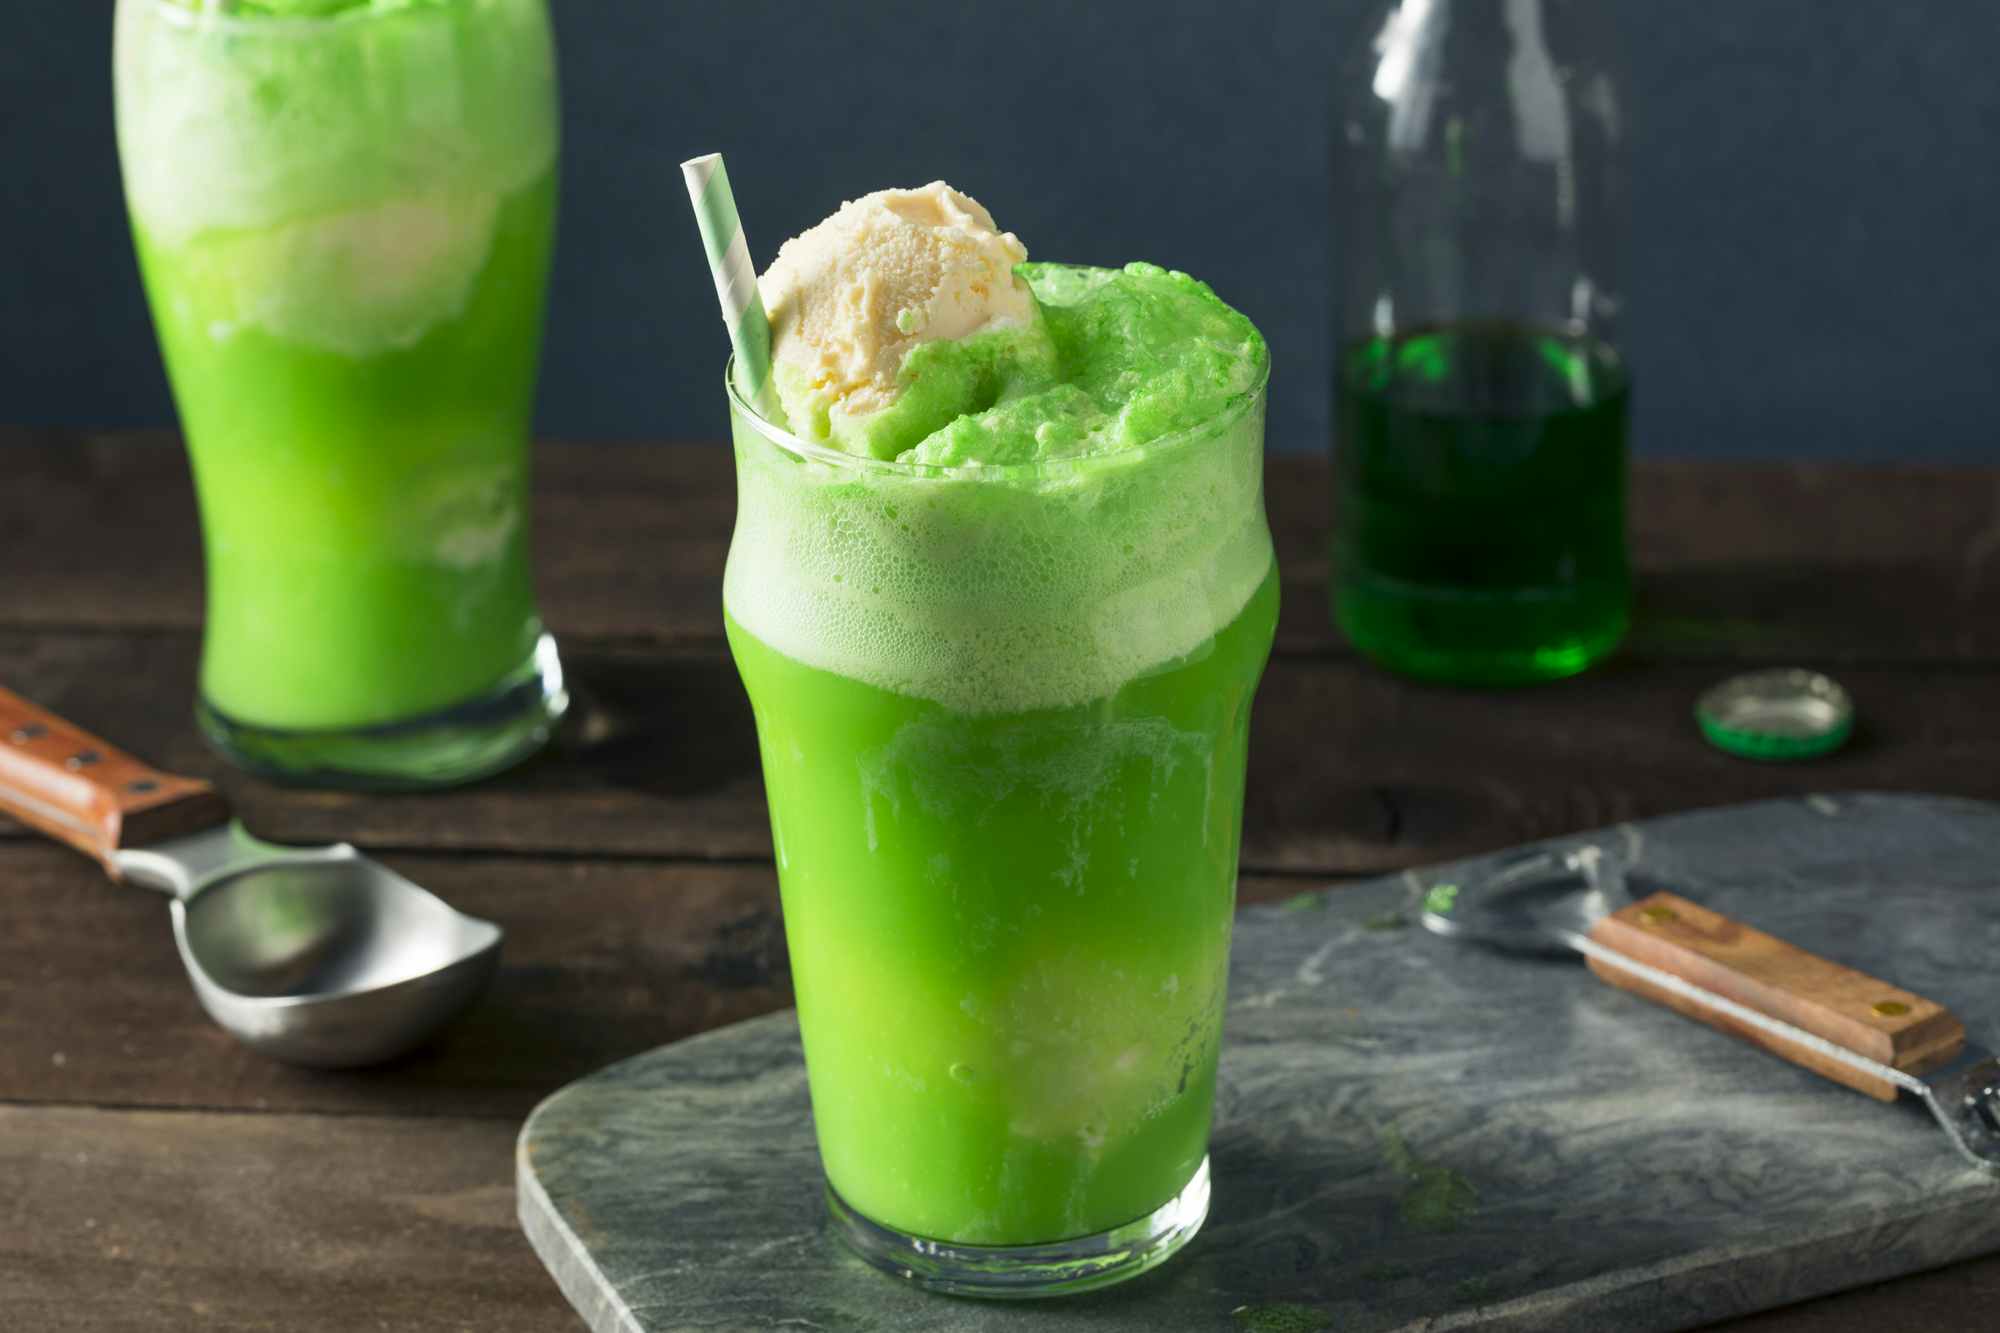 Green soda floats on a table with an ice cream scoop, a soda bottle, bottle opener, and bottle cap